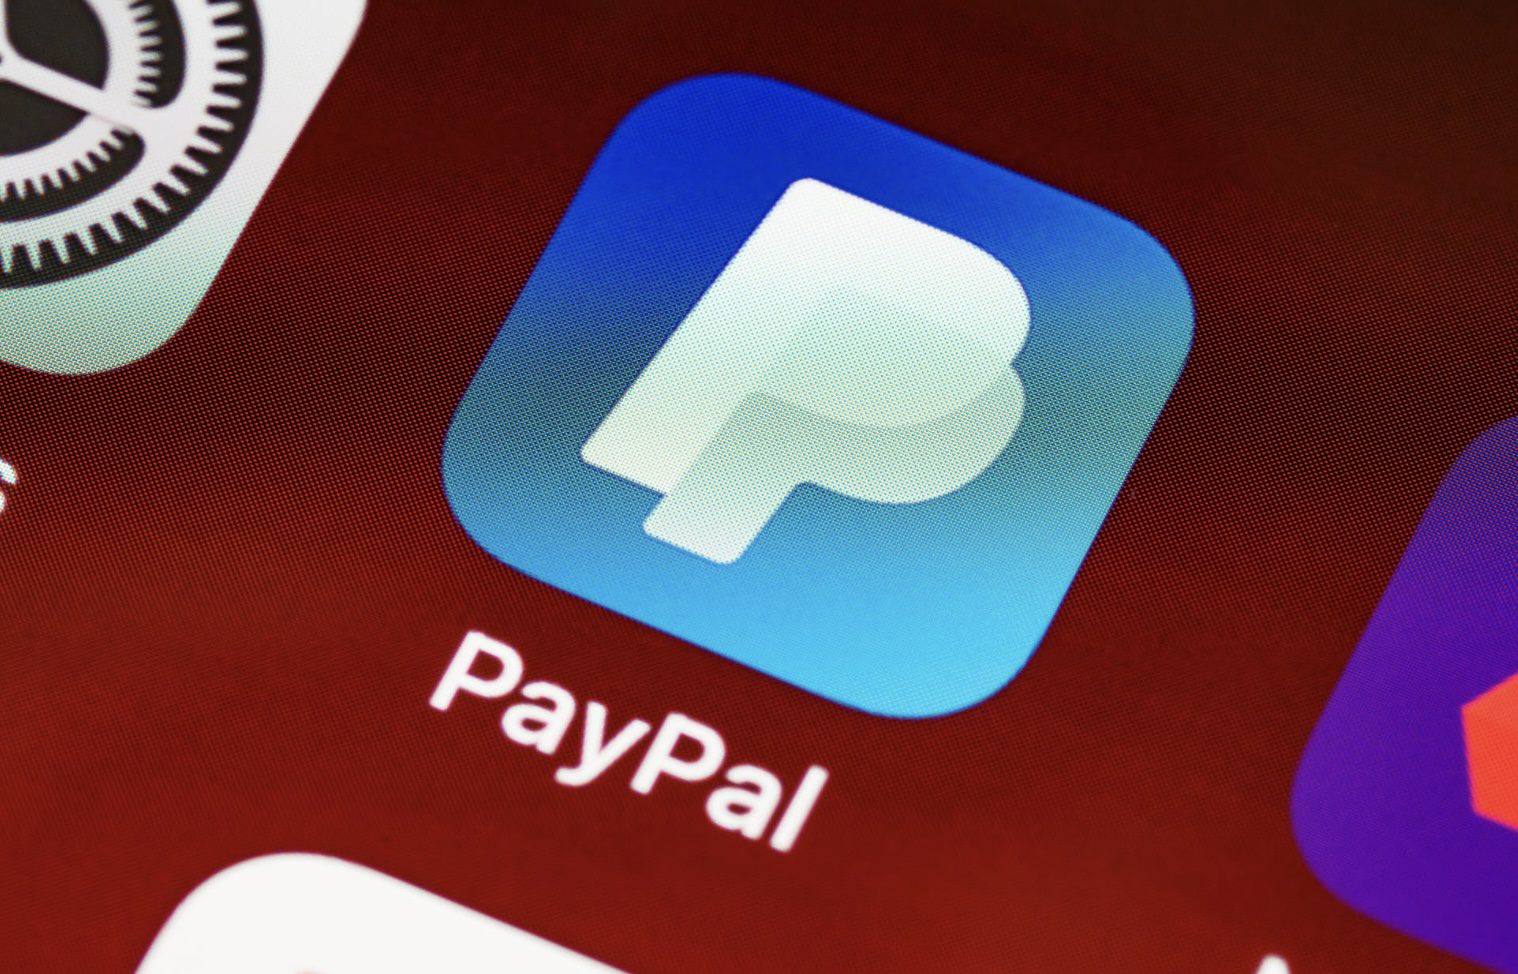 Following a Surge of Online Calls to Close PayPal Account, Several Users are Reporting Closing Issues